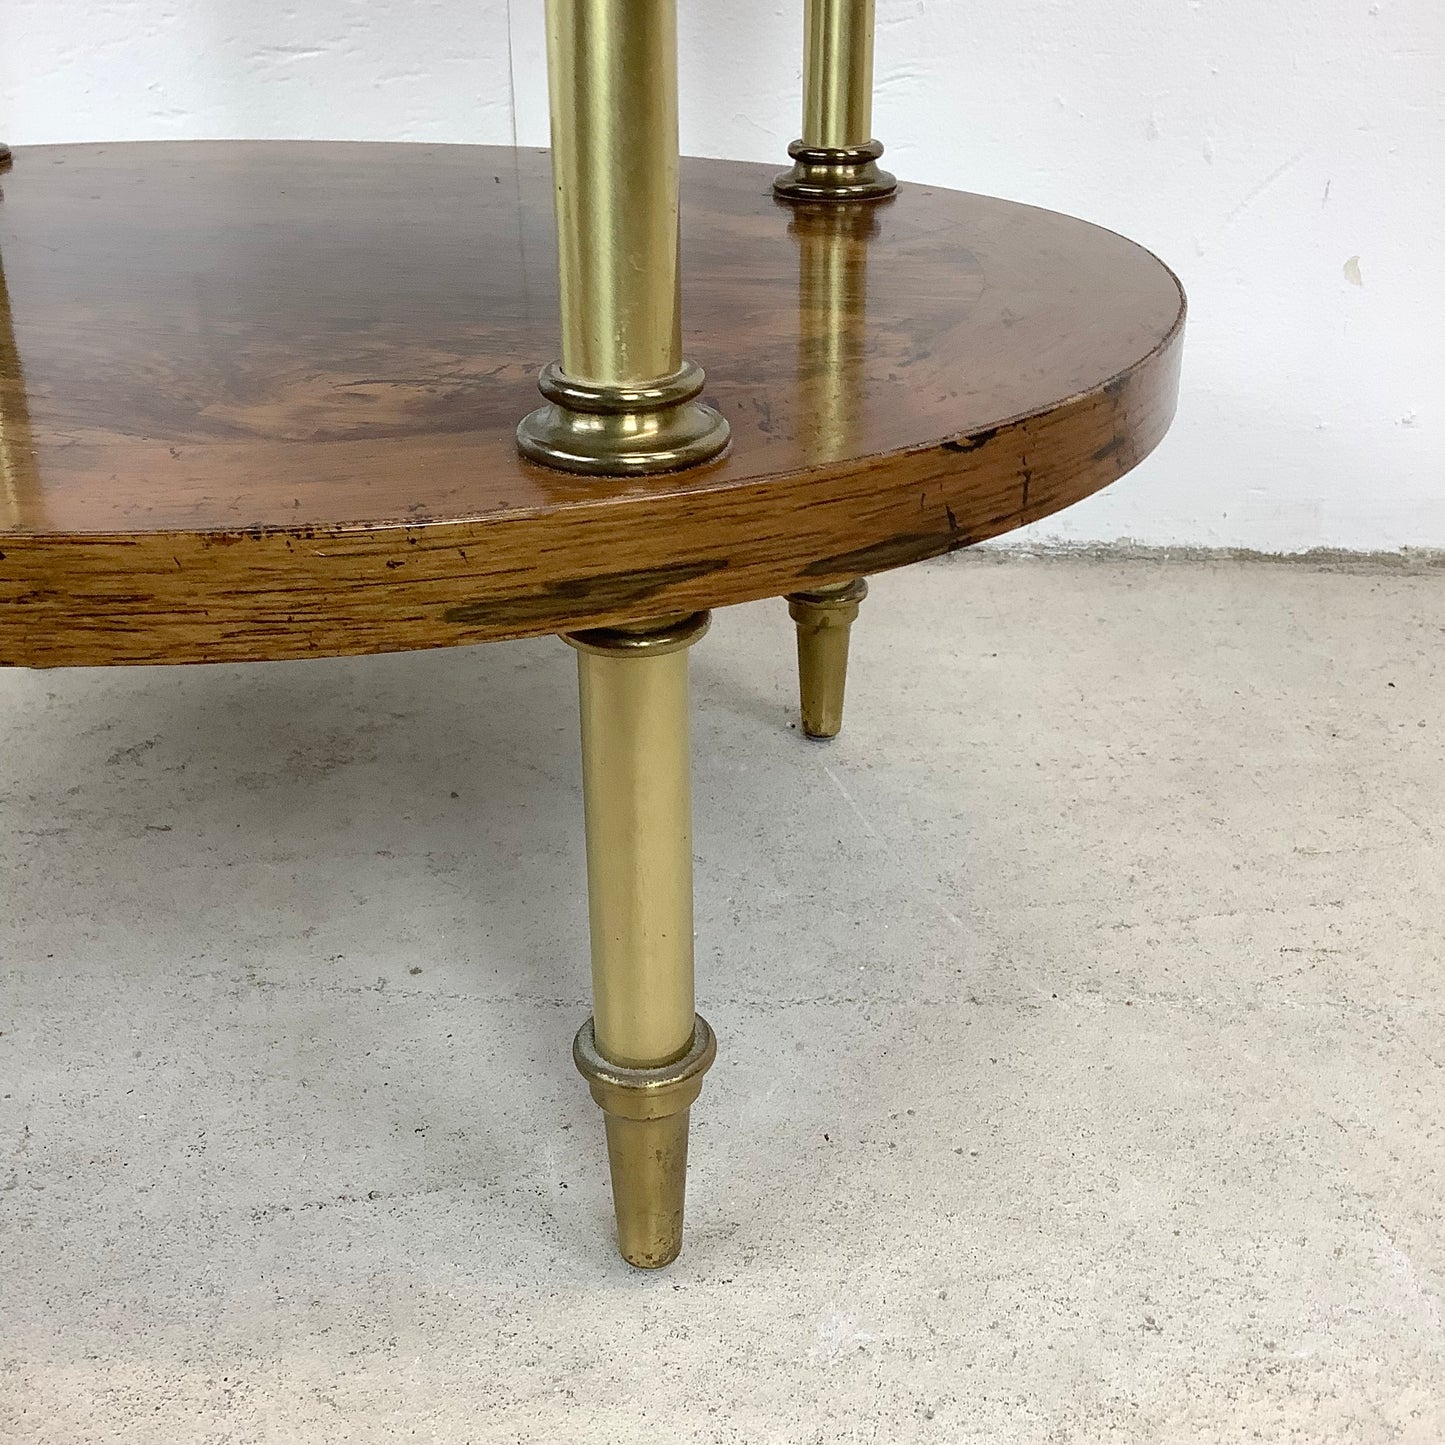 Vintage Burl and Brass Side Table or Drink Stand